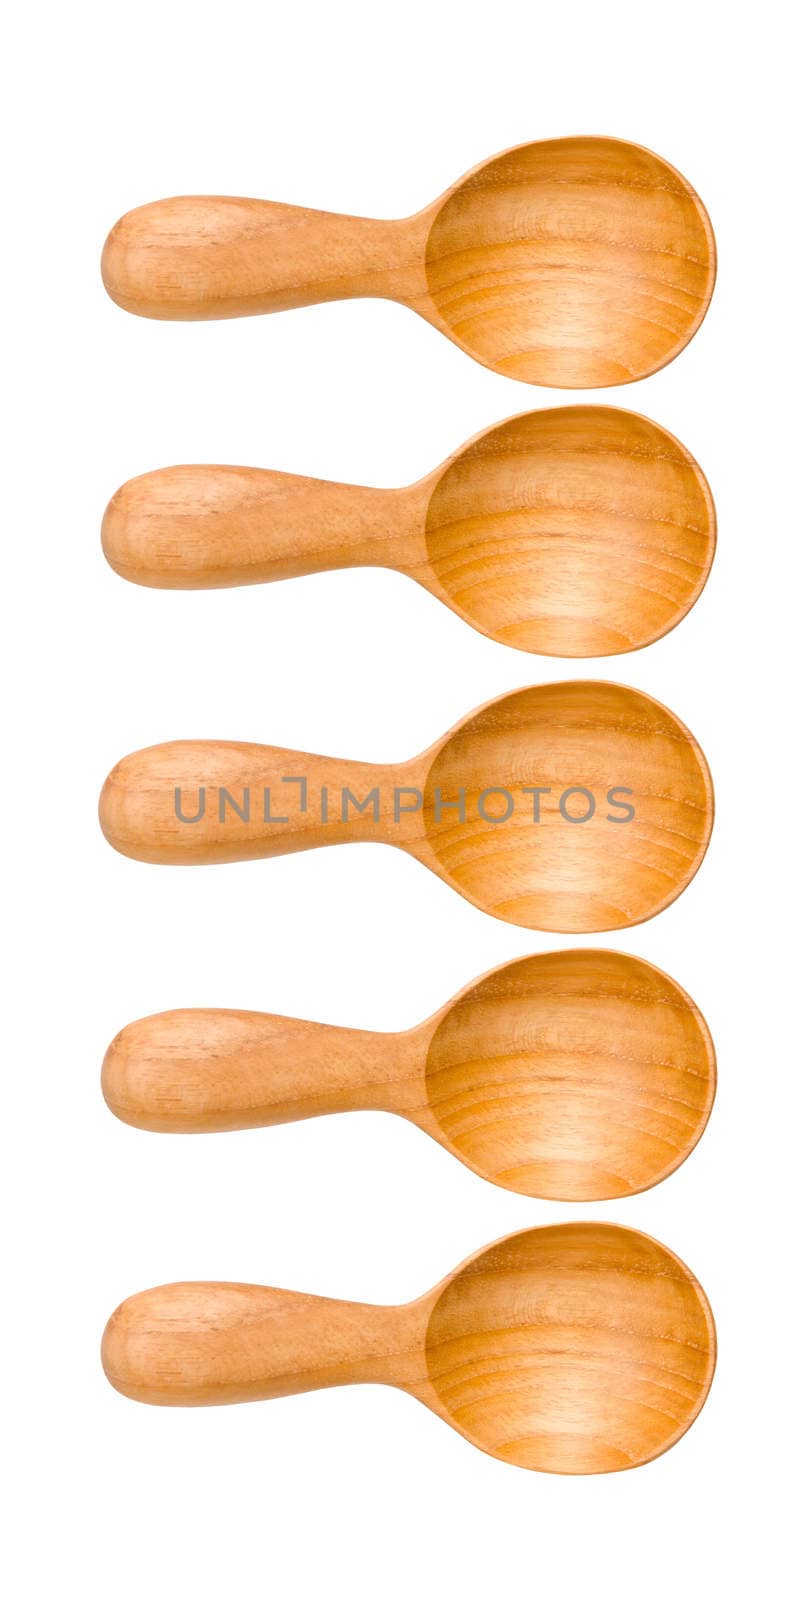 Isolated many wooden Kitchen spoons on white background by Gamjai